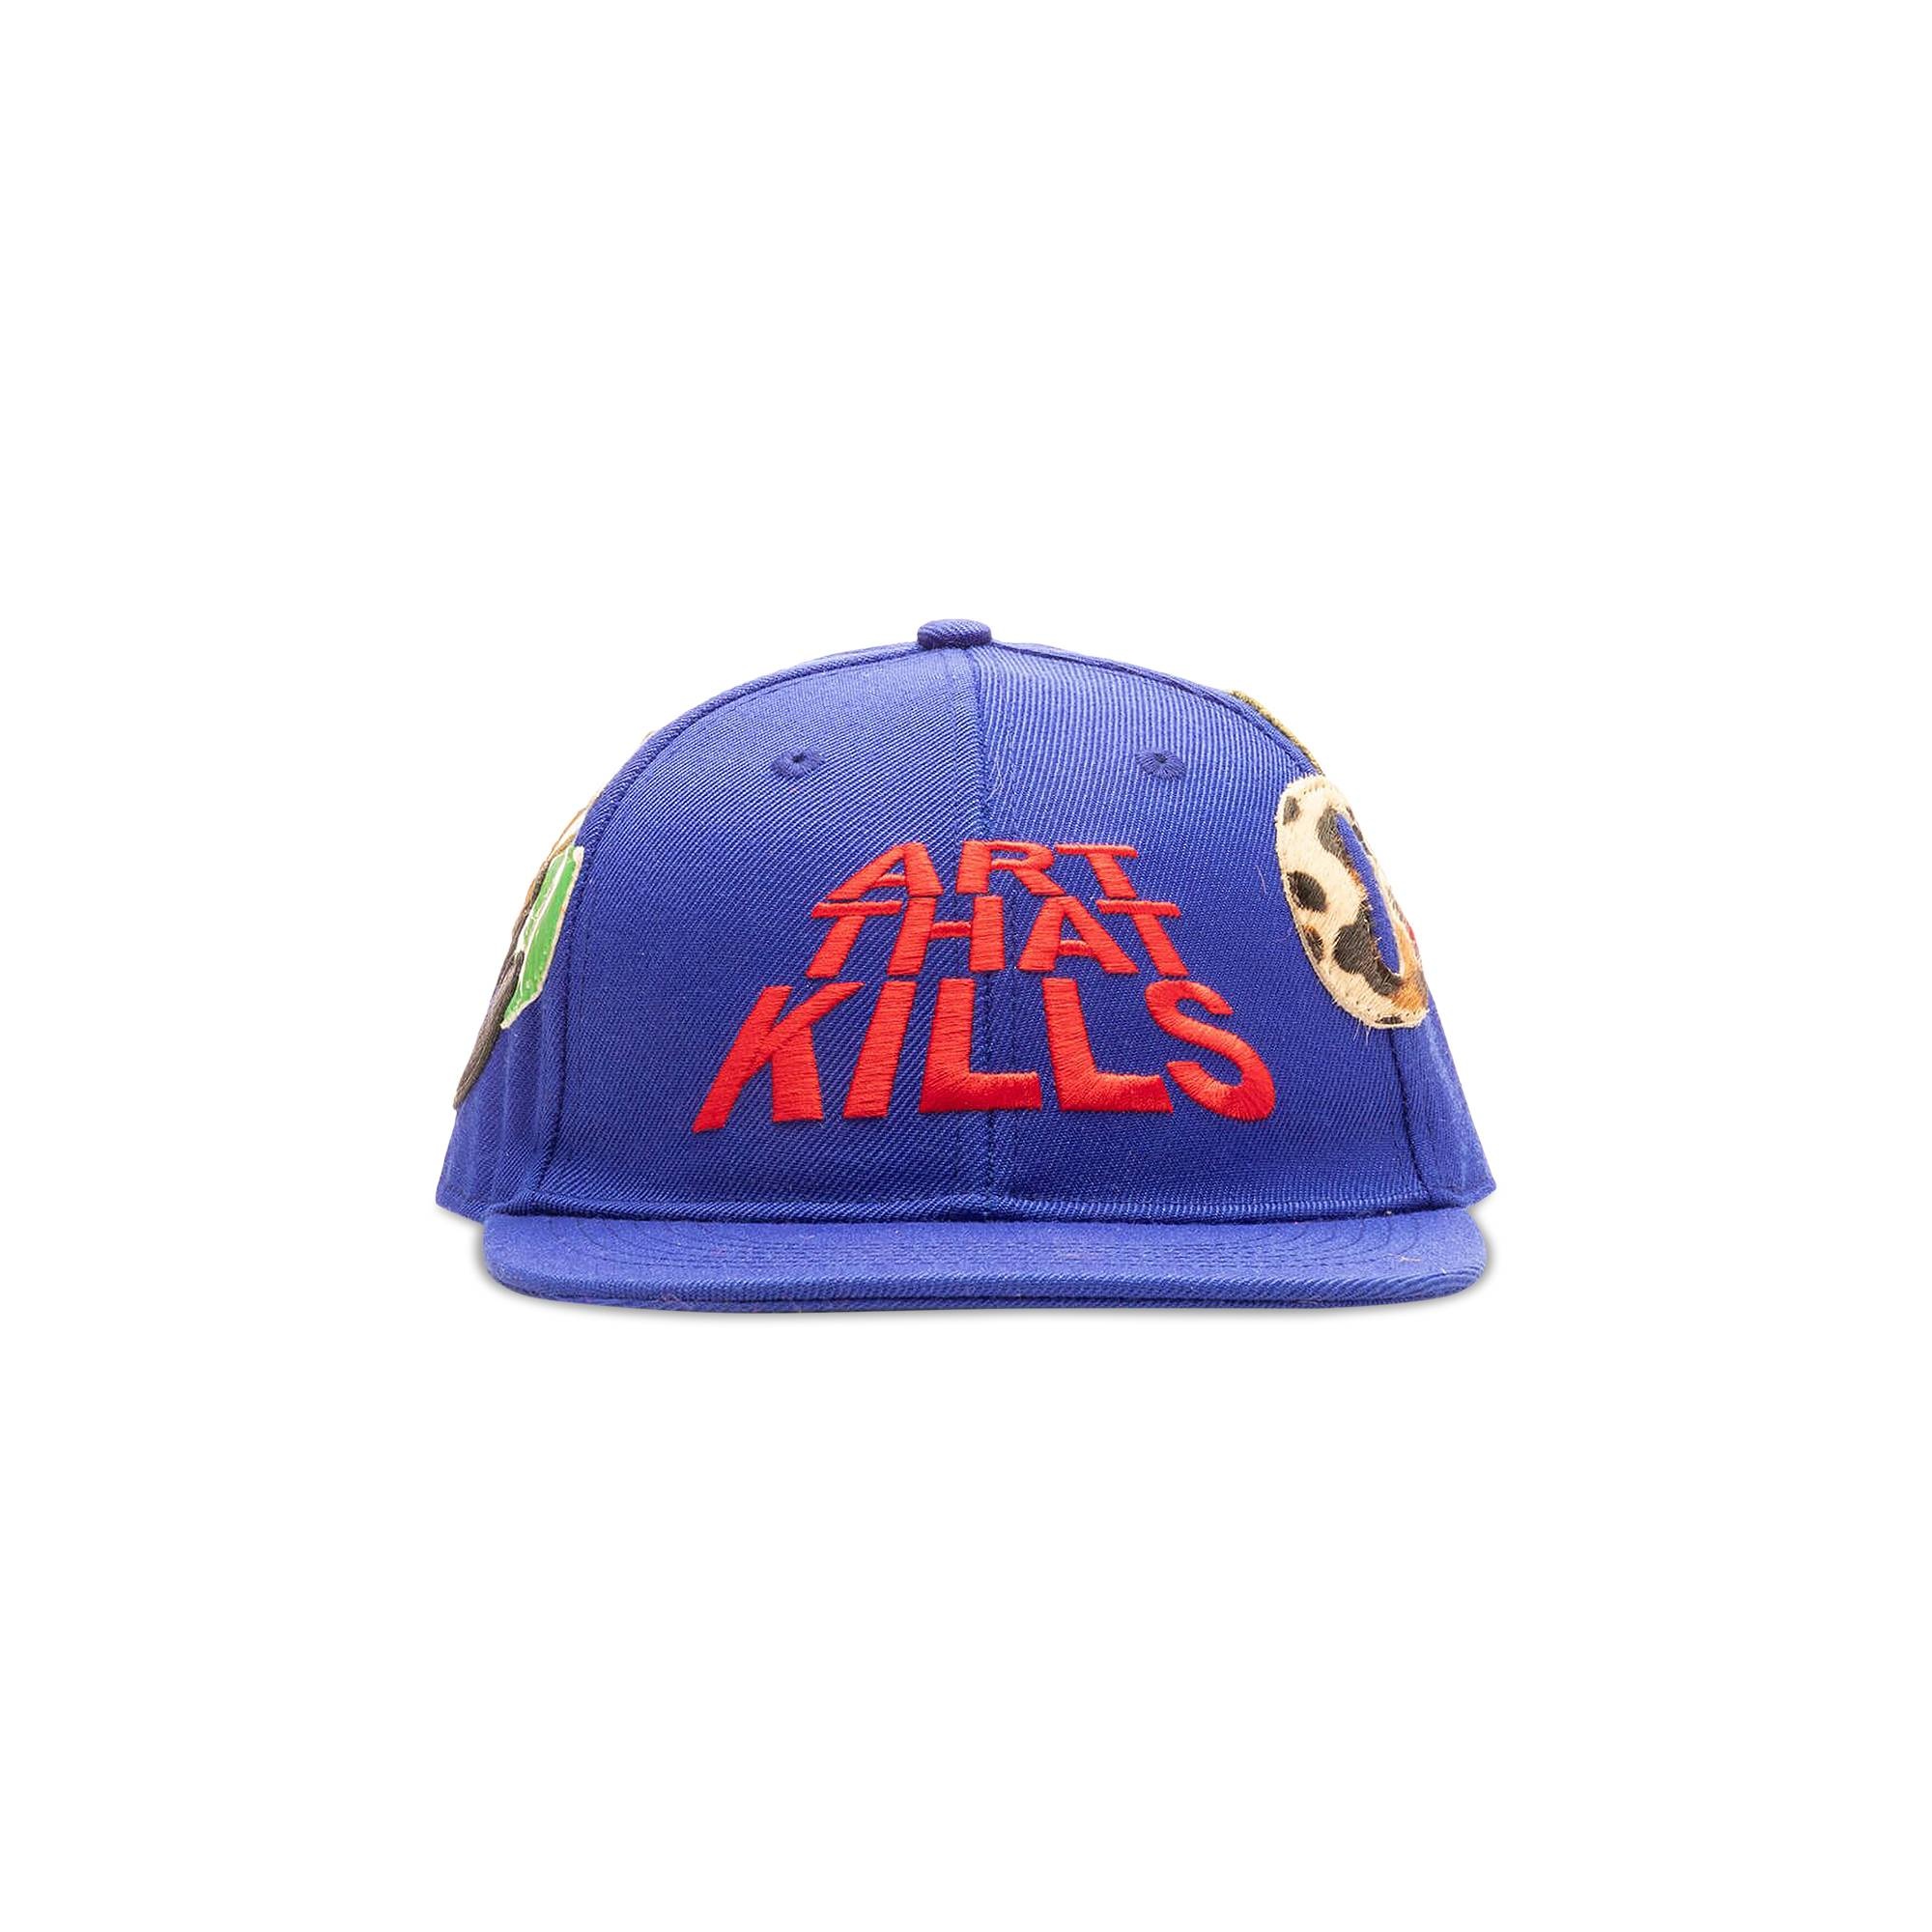 Gallery Dept. ATK G Patch Fitted Cap 'Blue' - 1